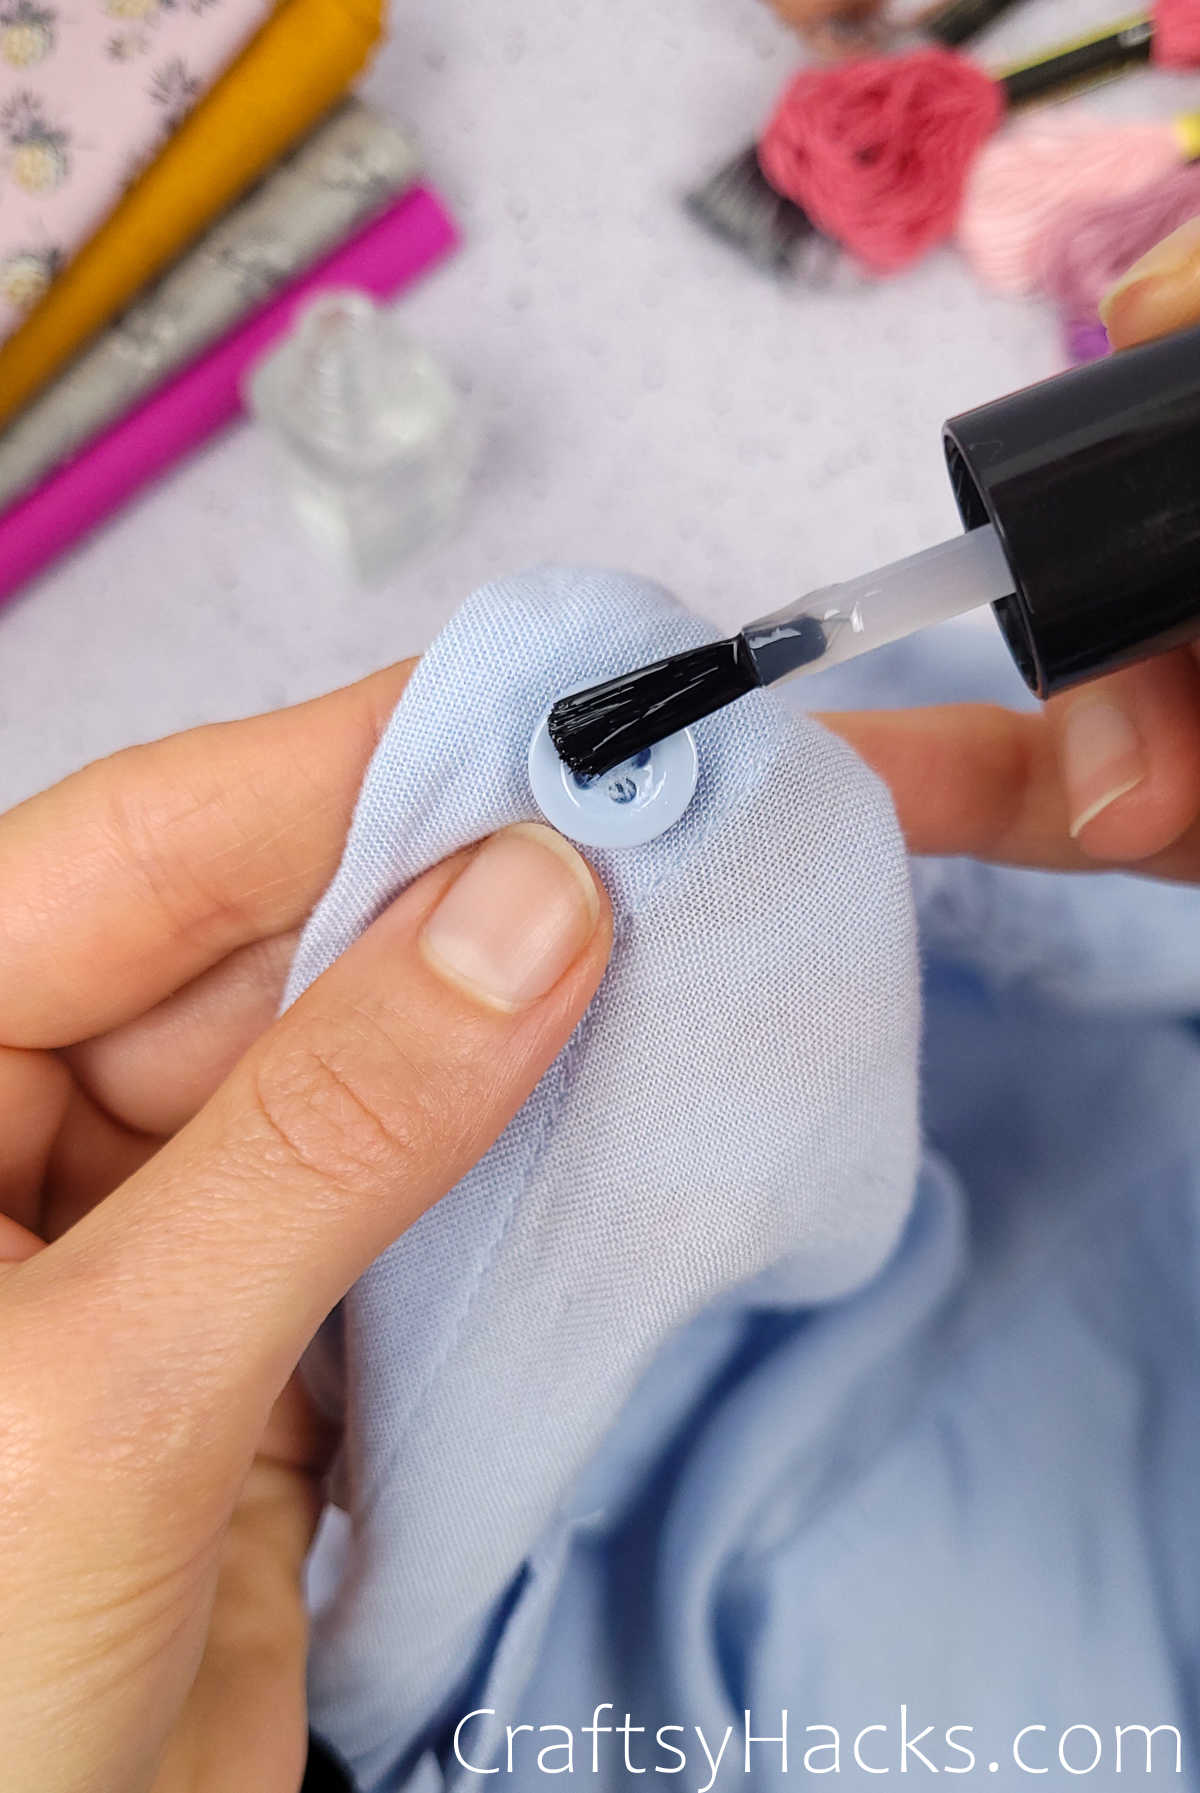 Use Clear Nail Polish to Protect the Thread